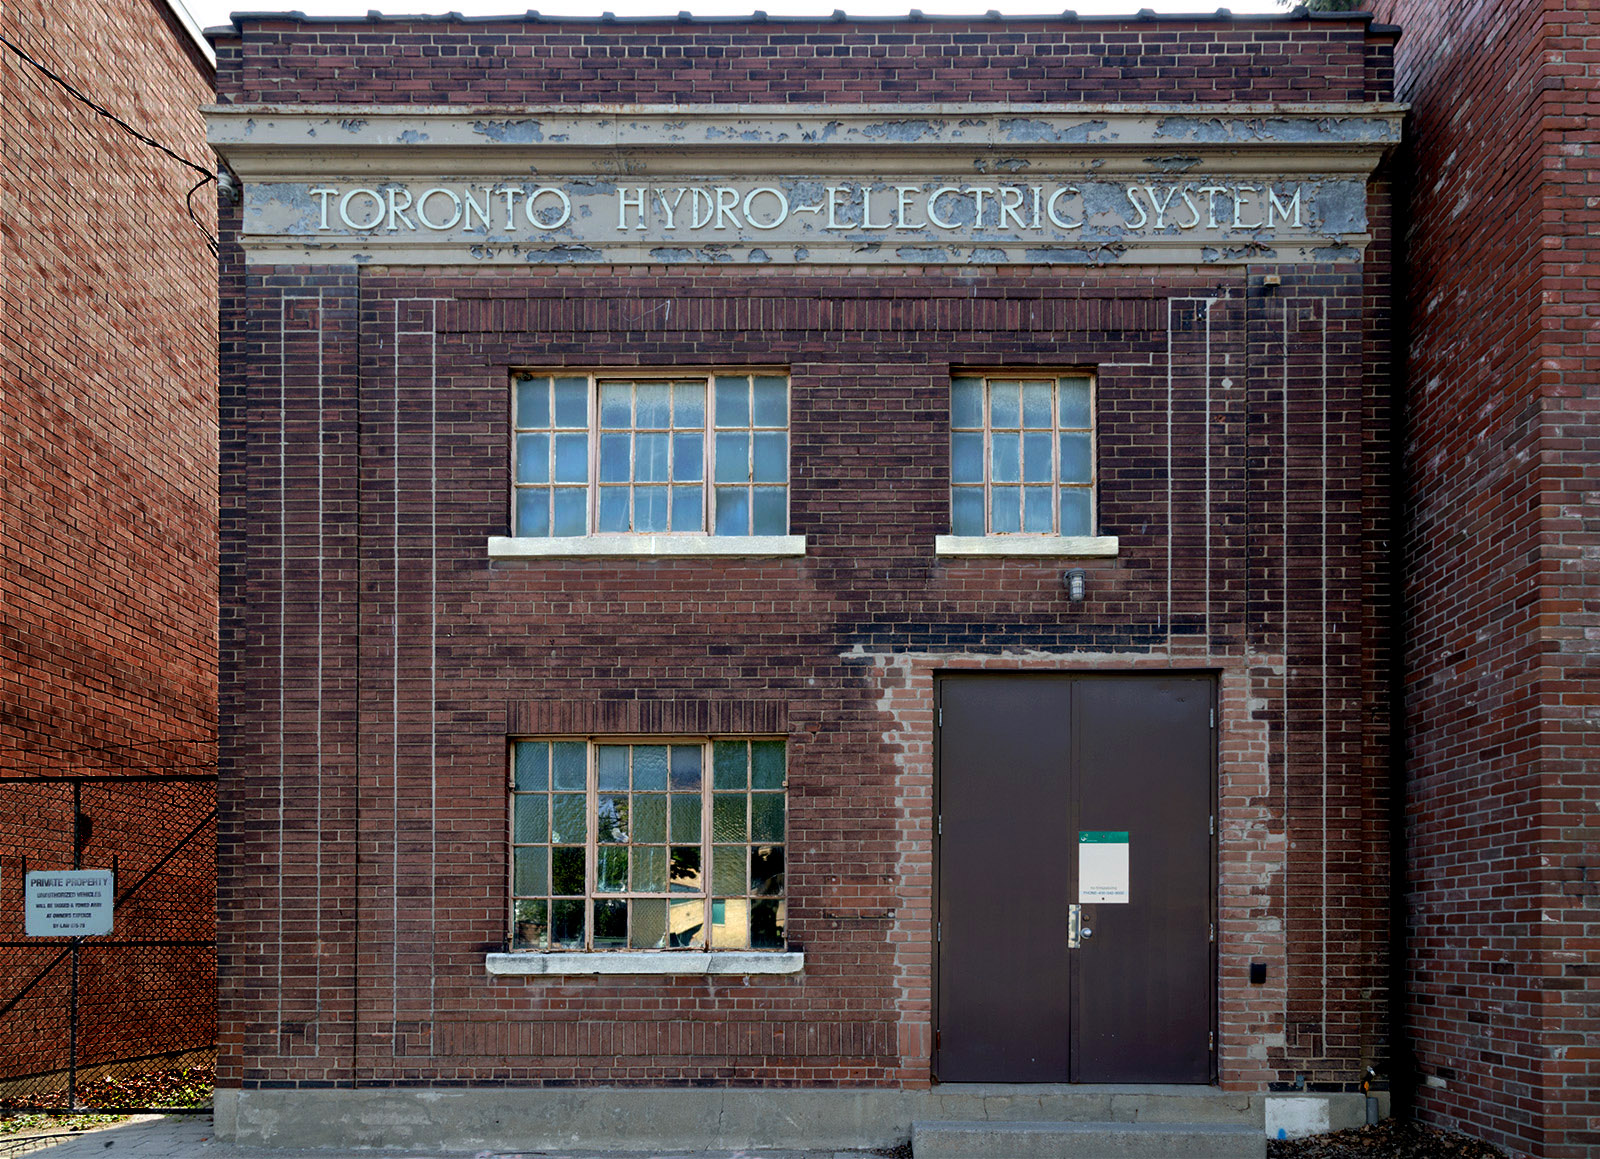 20150831. Does this Toronto Hydro Substation have a heritage des